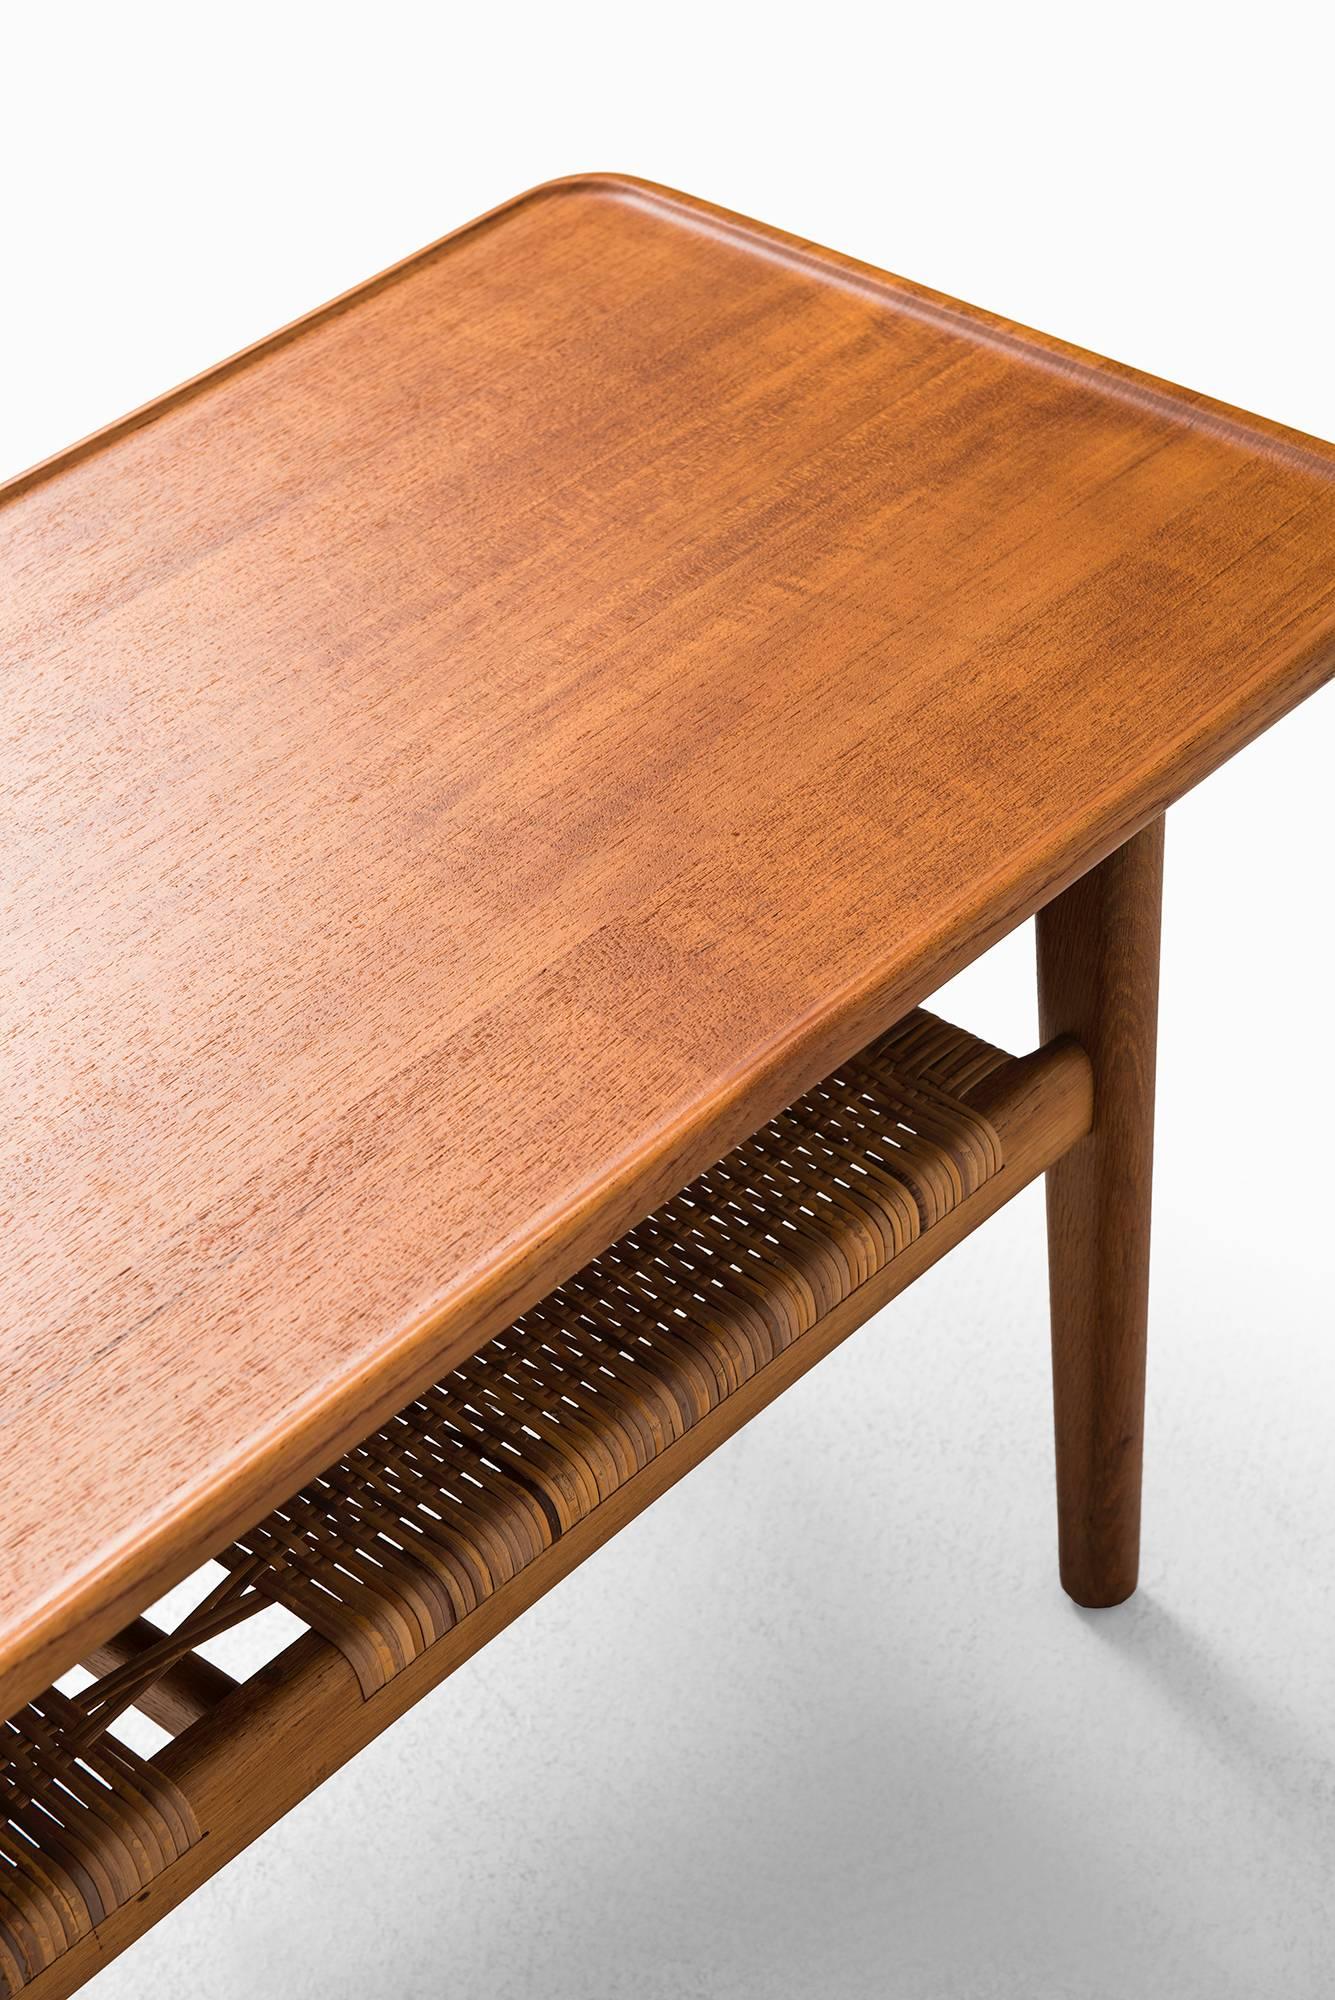 Cane Hans Wegner Coffee Table Model AT-10 by Andreas Tuck in Denmark